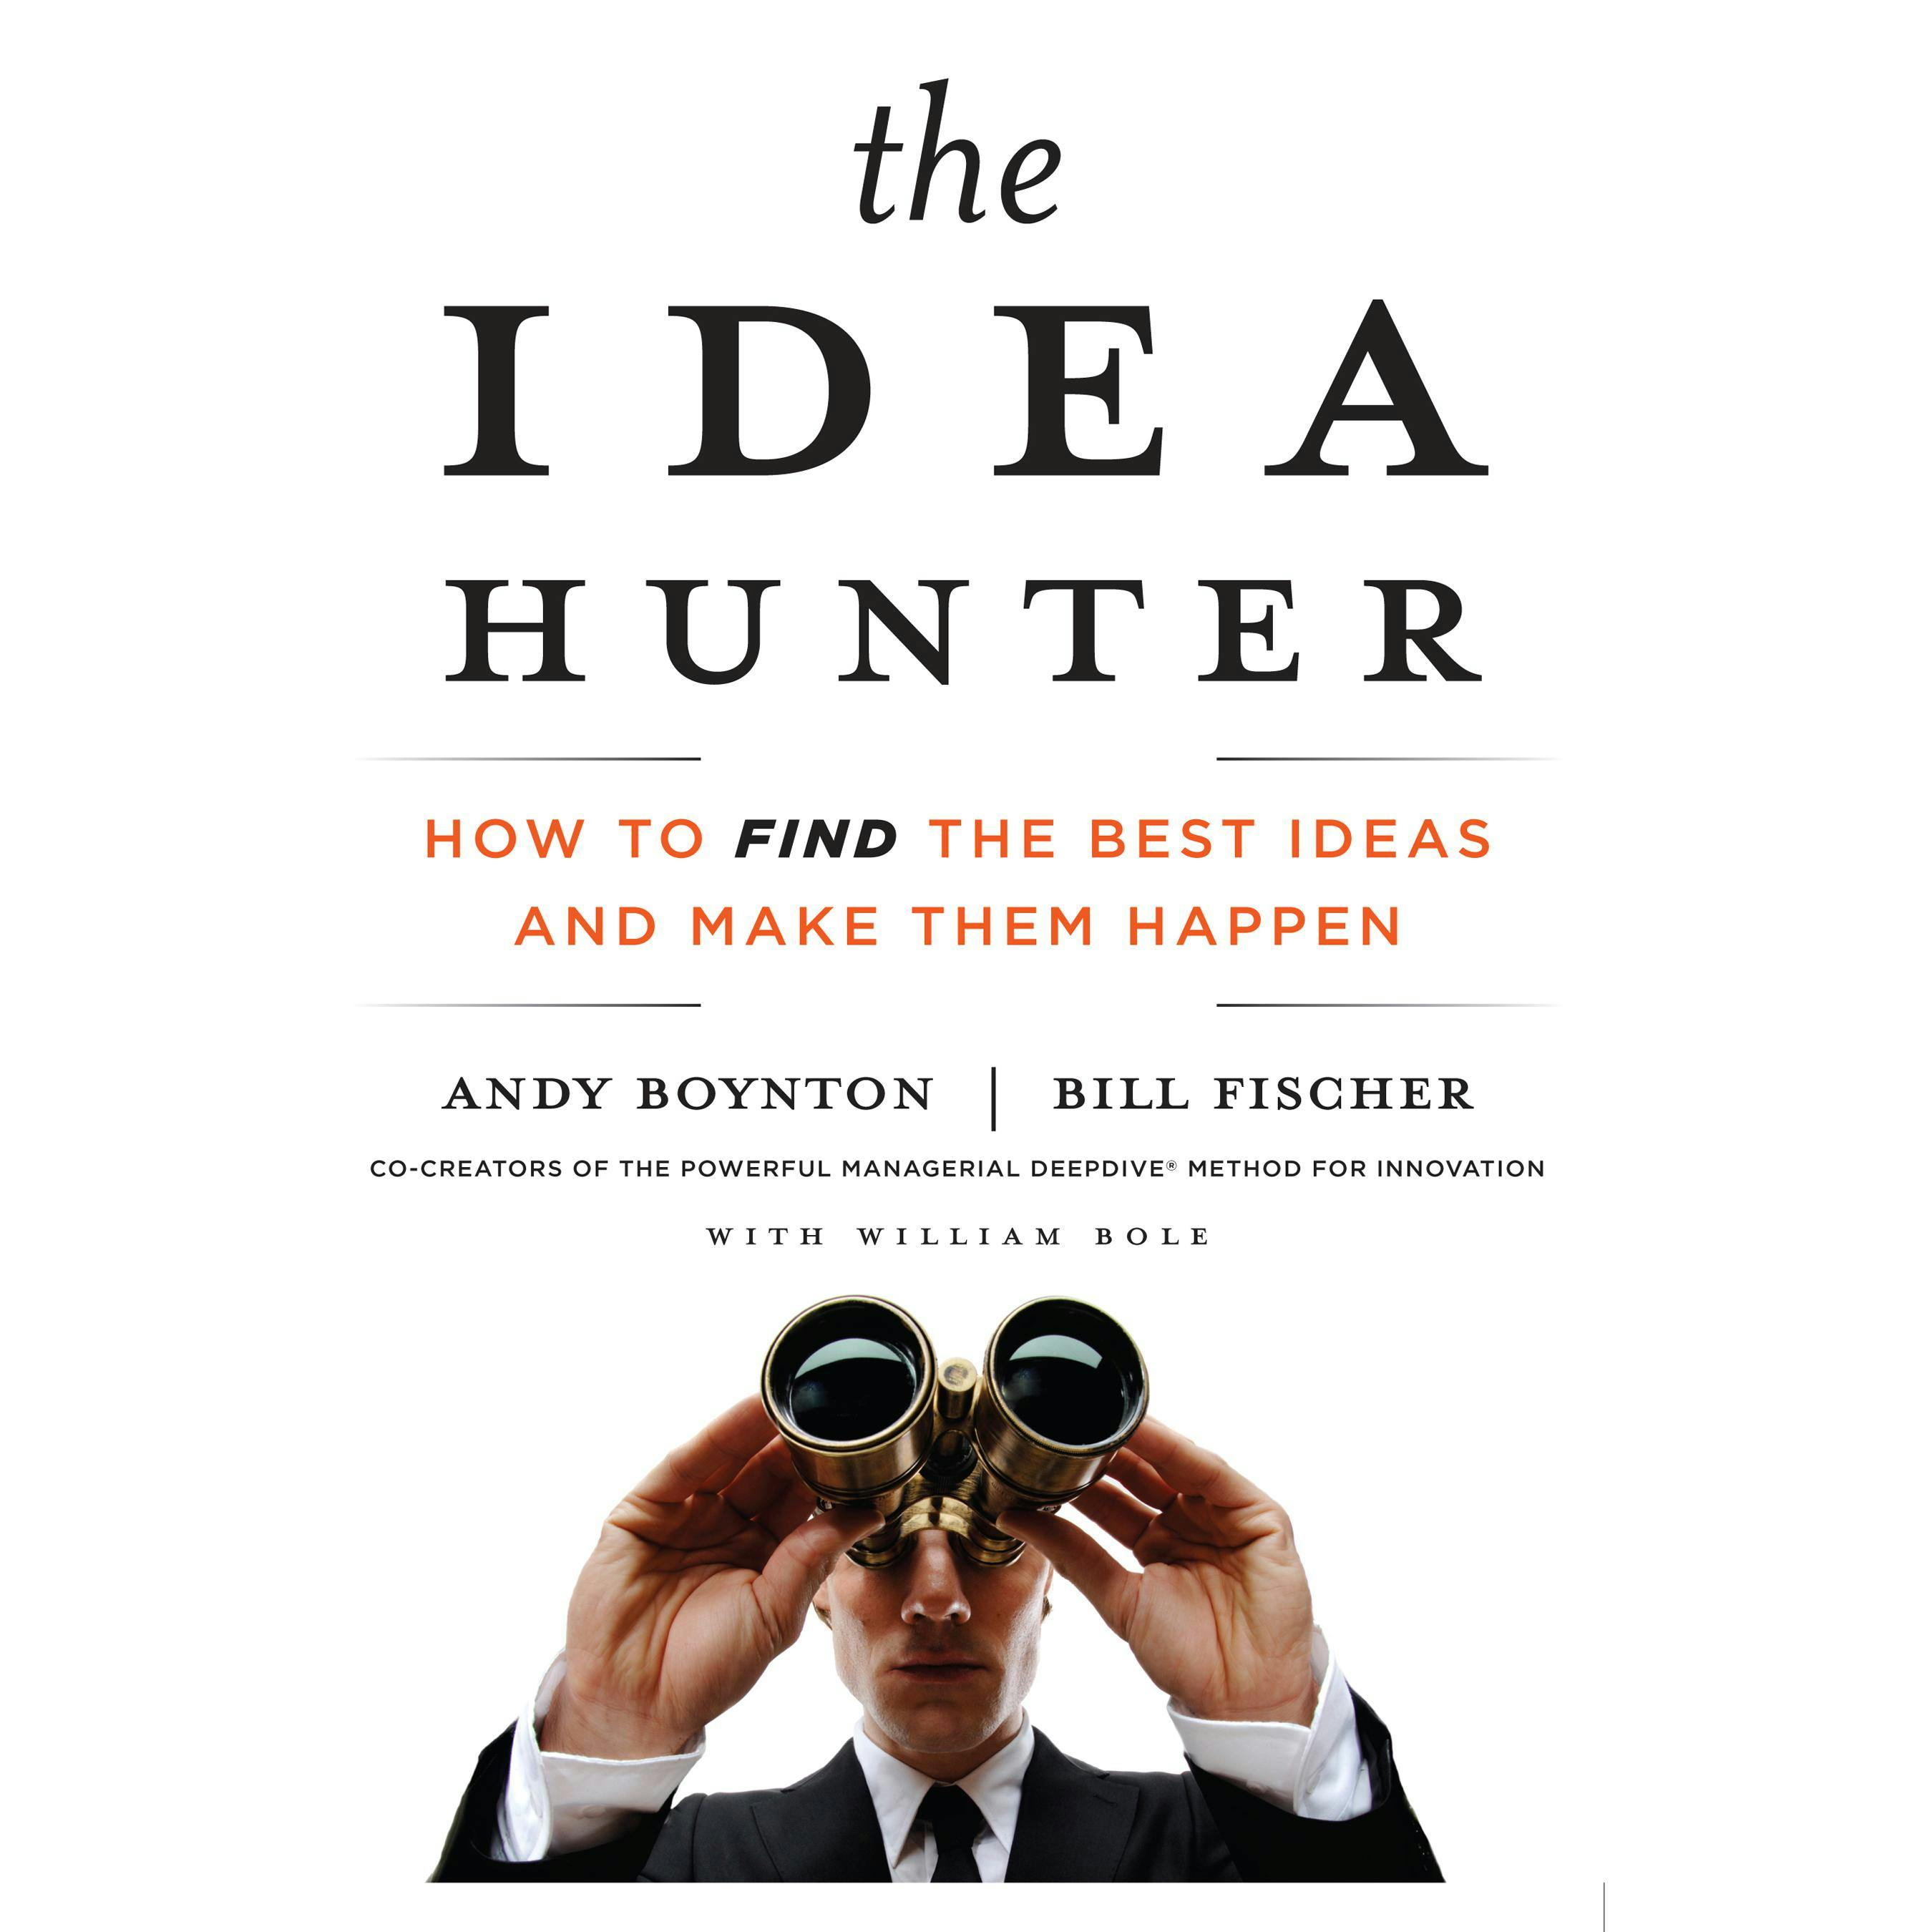 The Idea Hunter: How to Find the Best Ideas and Make Them Happen - William Bole, Andy Boynton, Bill Fischer